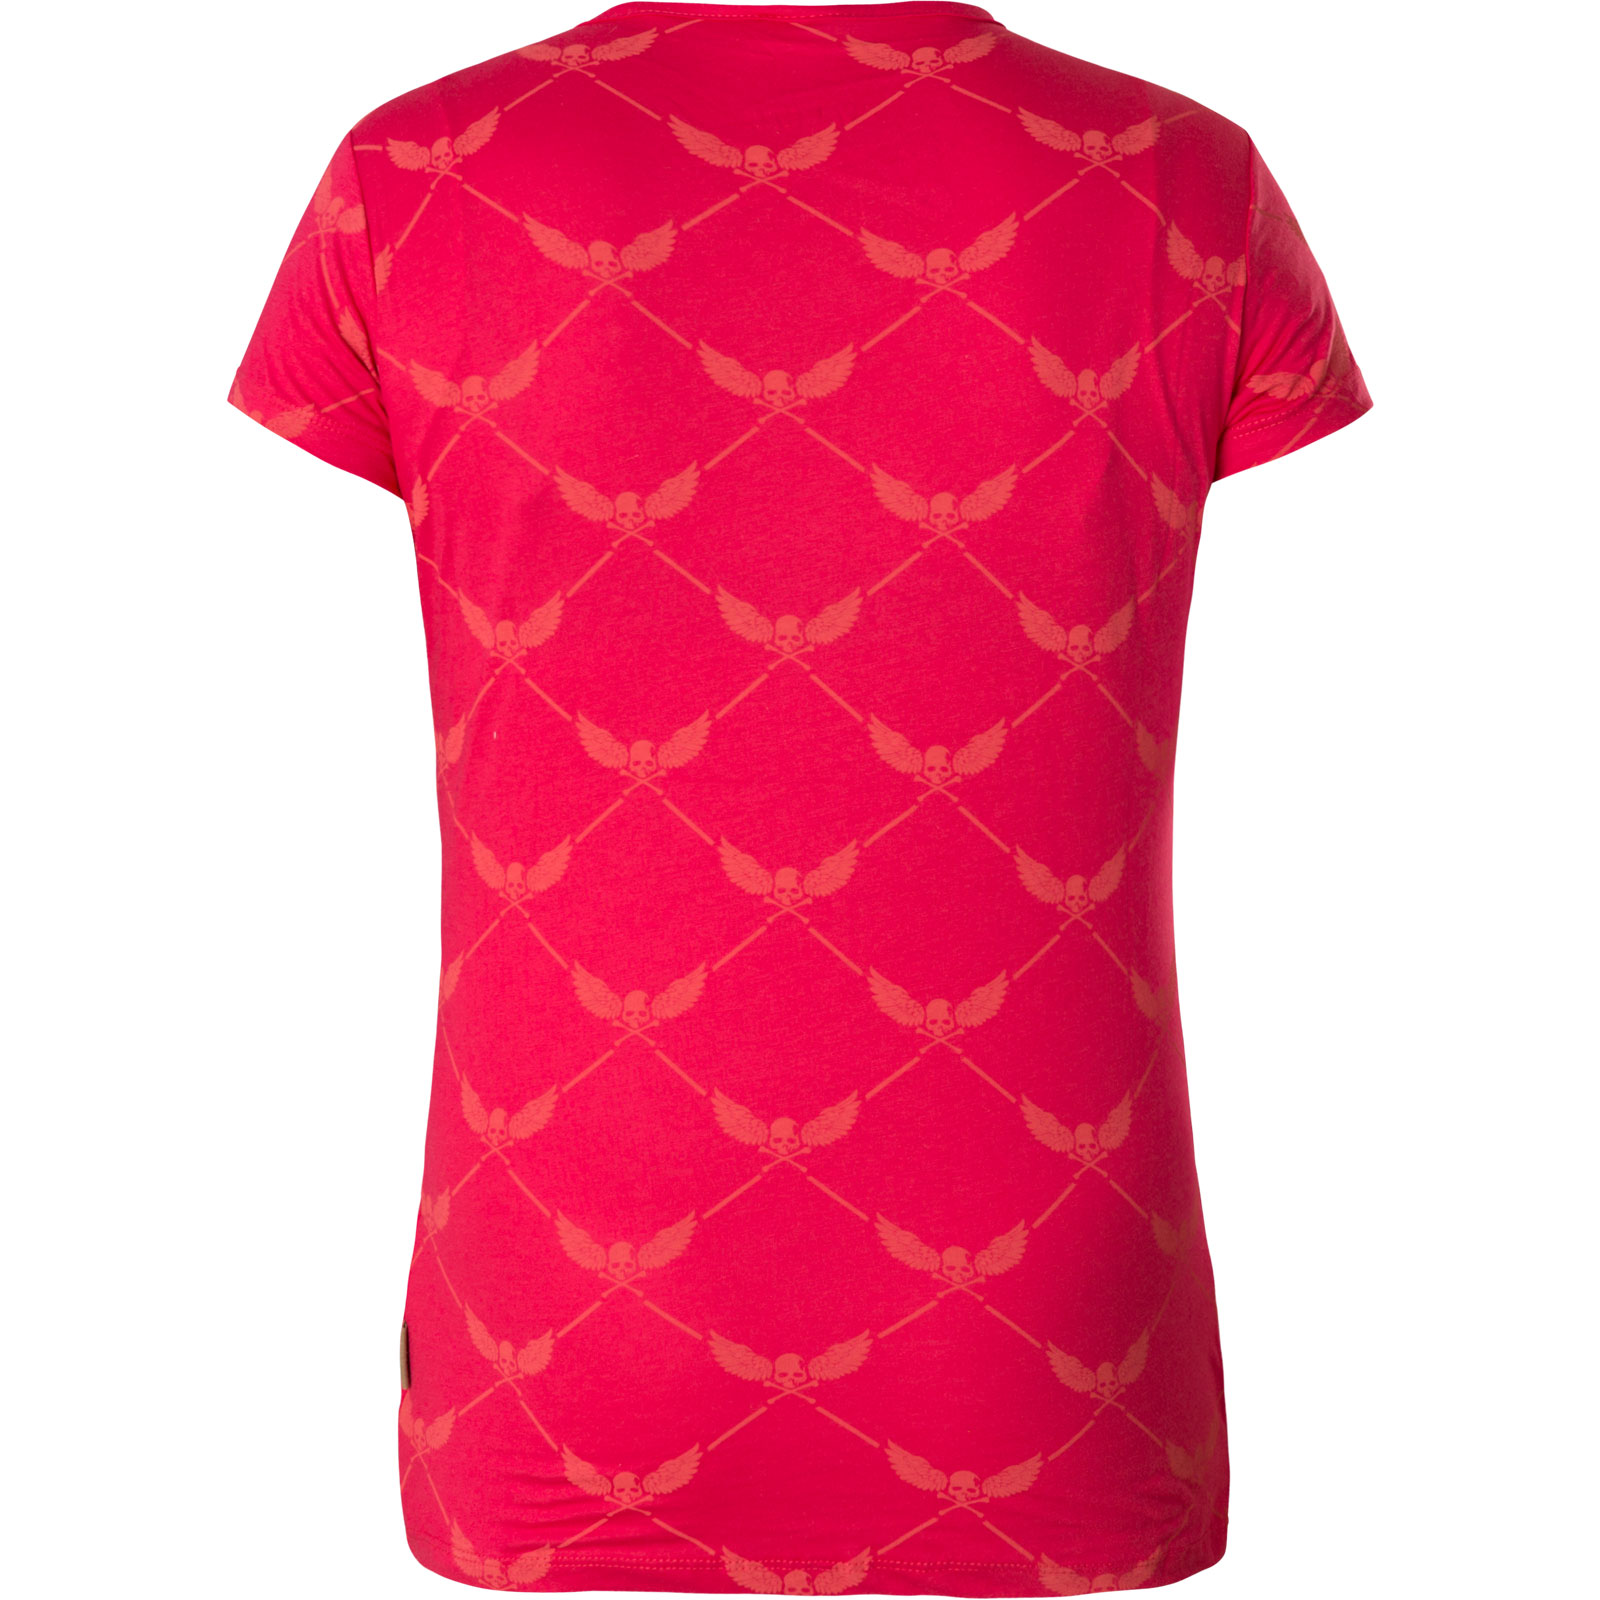 Yakuza Crests V-Neck GSB-14141 Print in red with a skull and wings